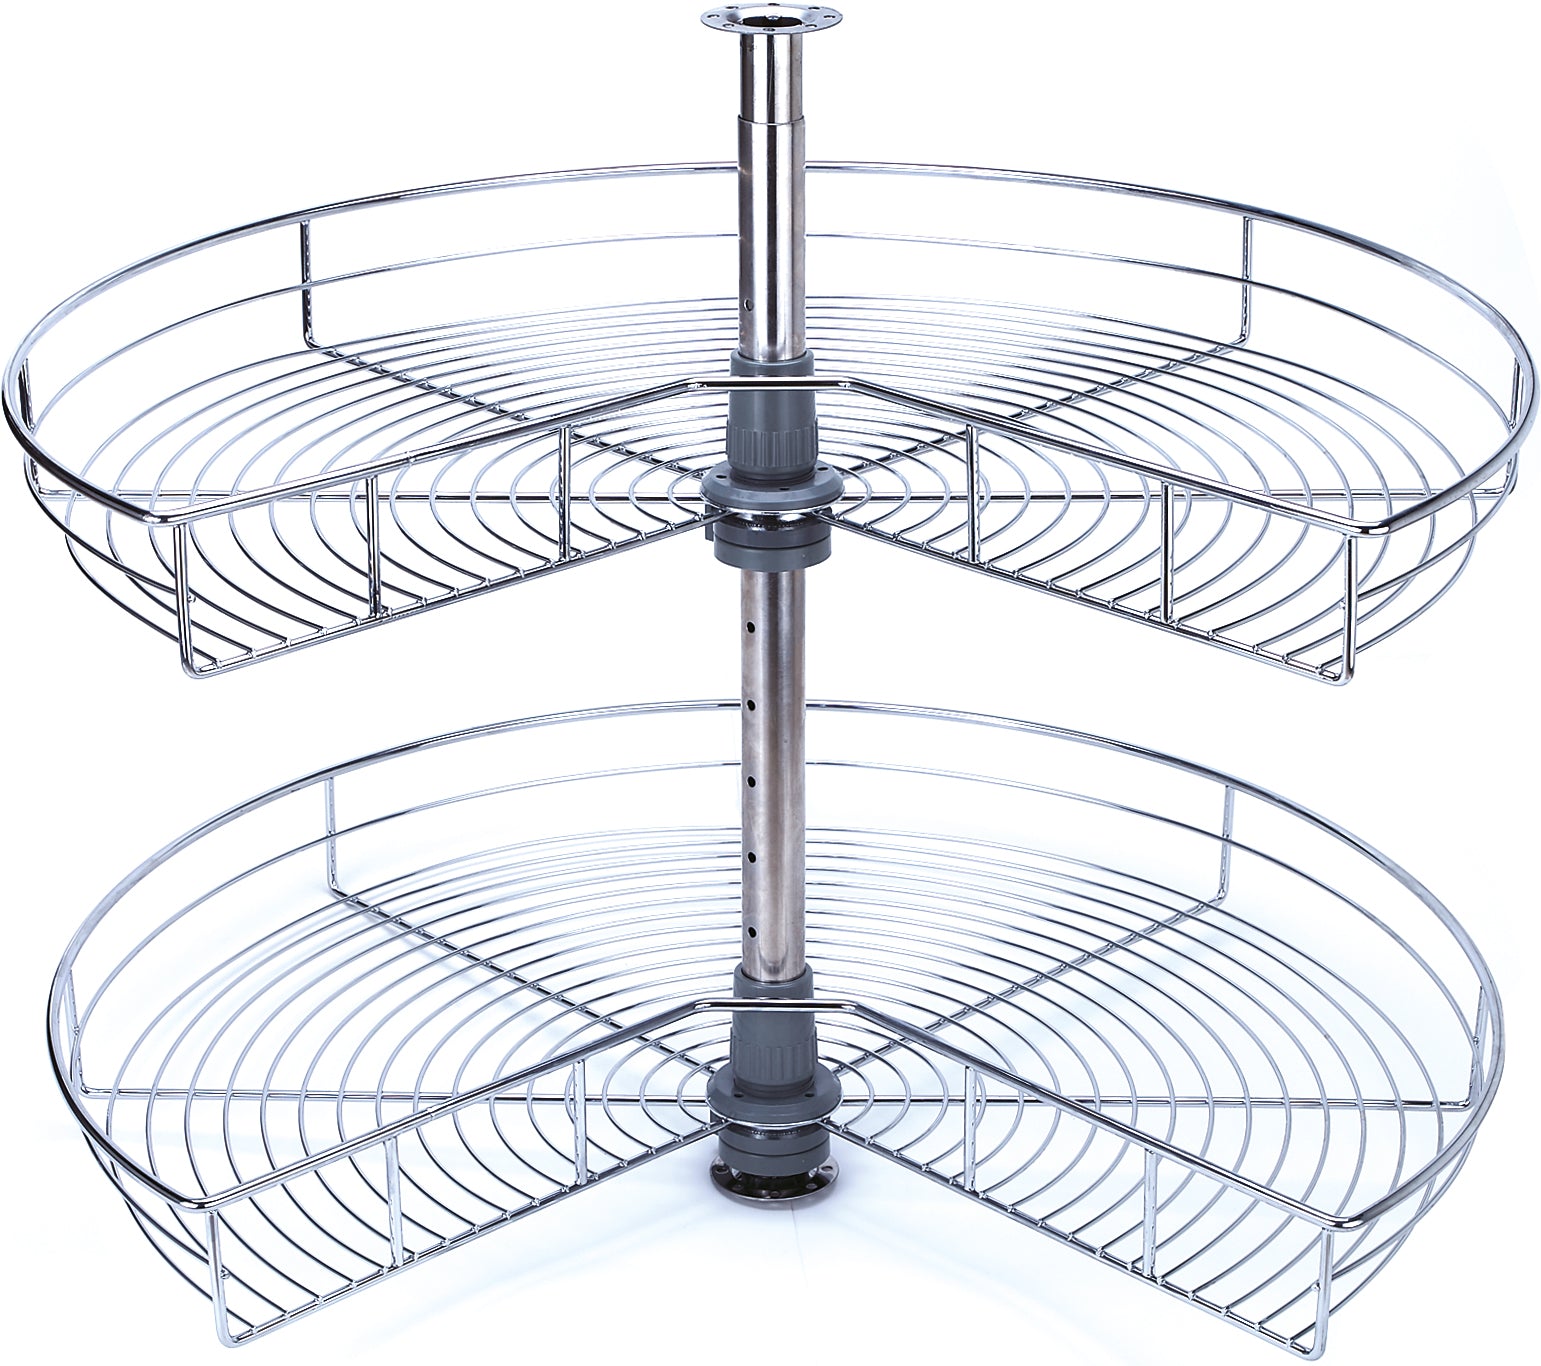 Silverline LSK - 24 inch 28inch 32inch Wire Lazy Susan Kidney Shape Corner Organizer Double Rack Turntable and Spindle